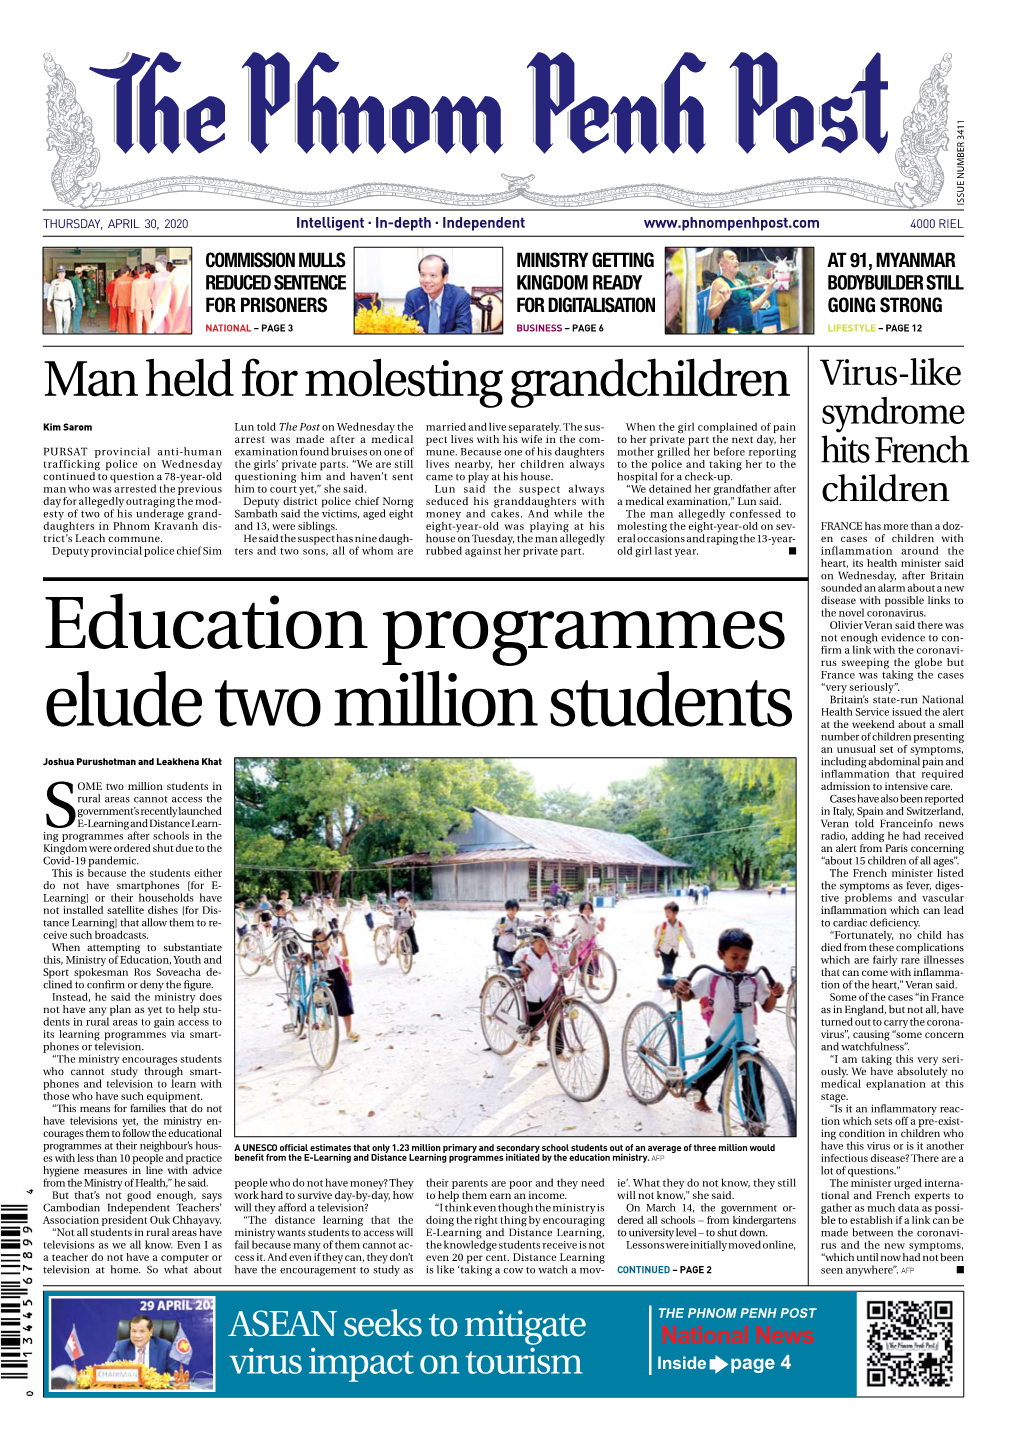 Education Programmes Elude Two Million Students